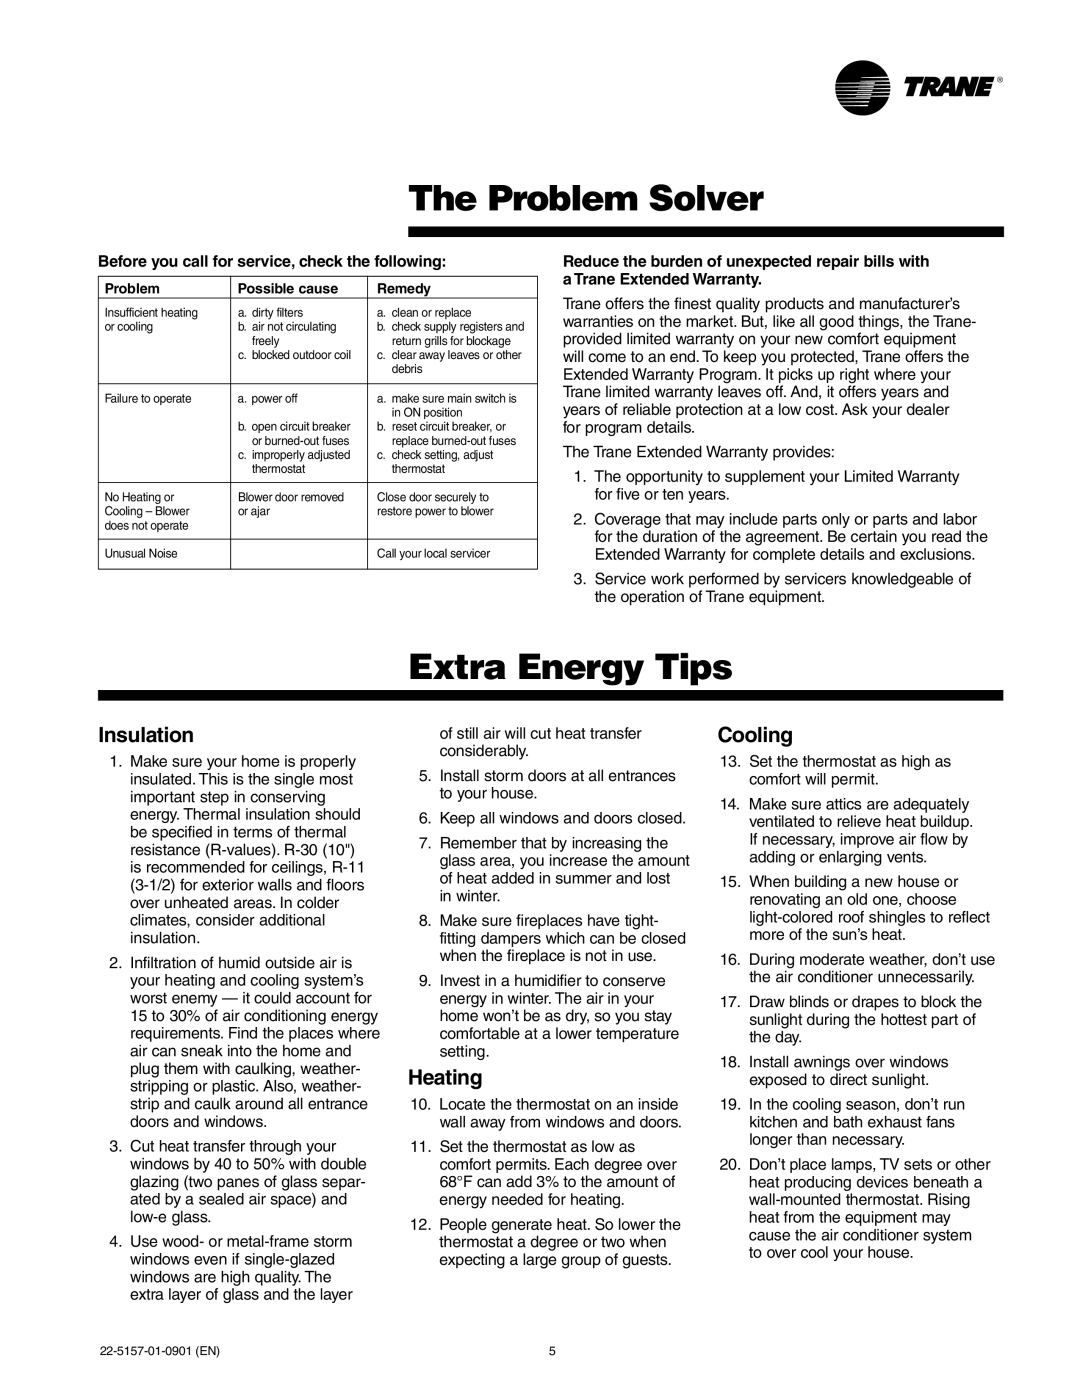 Trane Central Air Conditioning manual The Problem Solver, Extra Energy Tips, Insulation, Heating, Cooling 